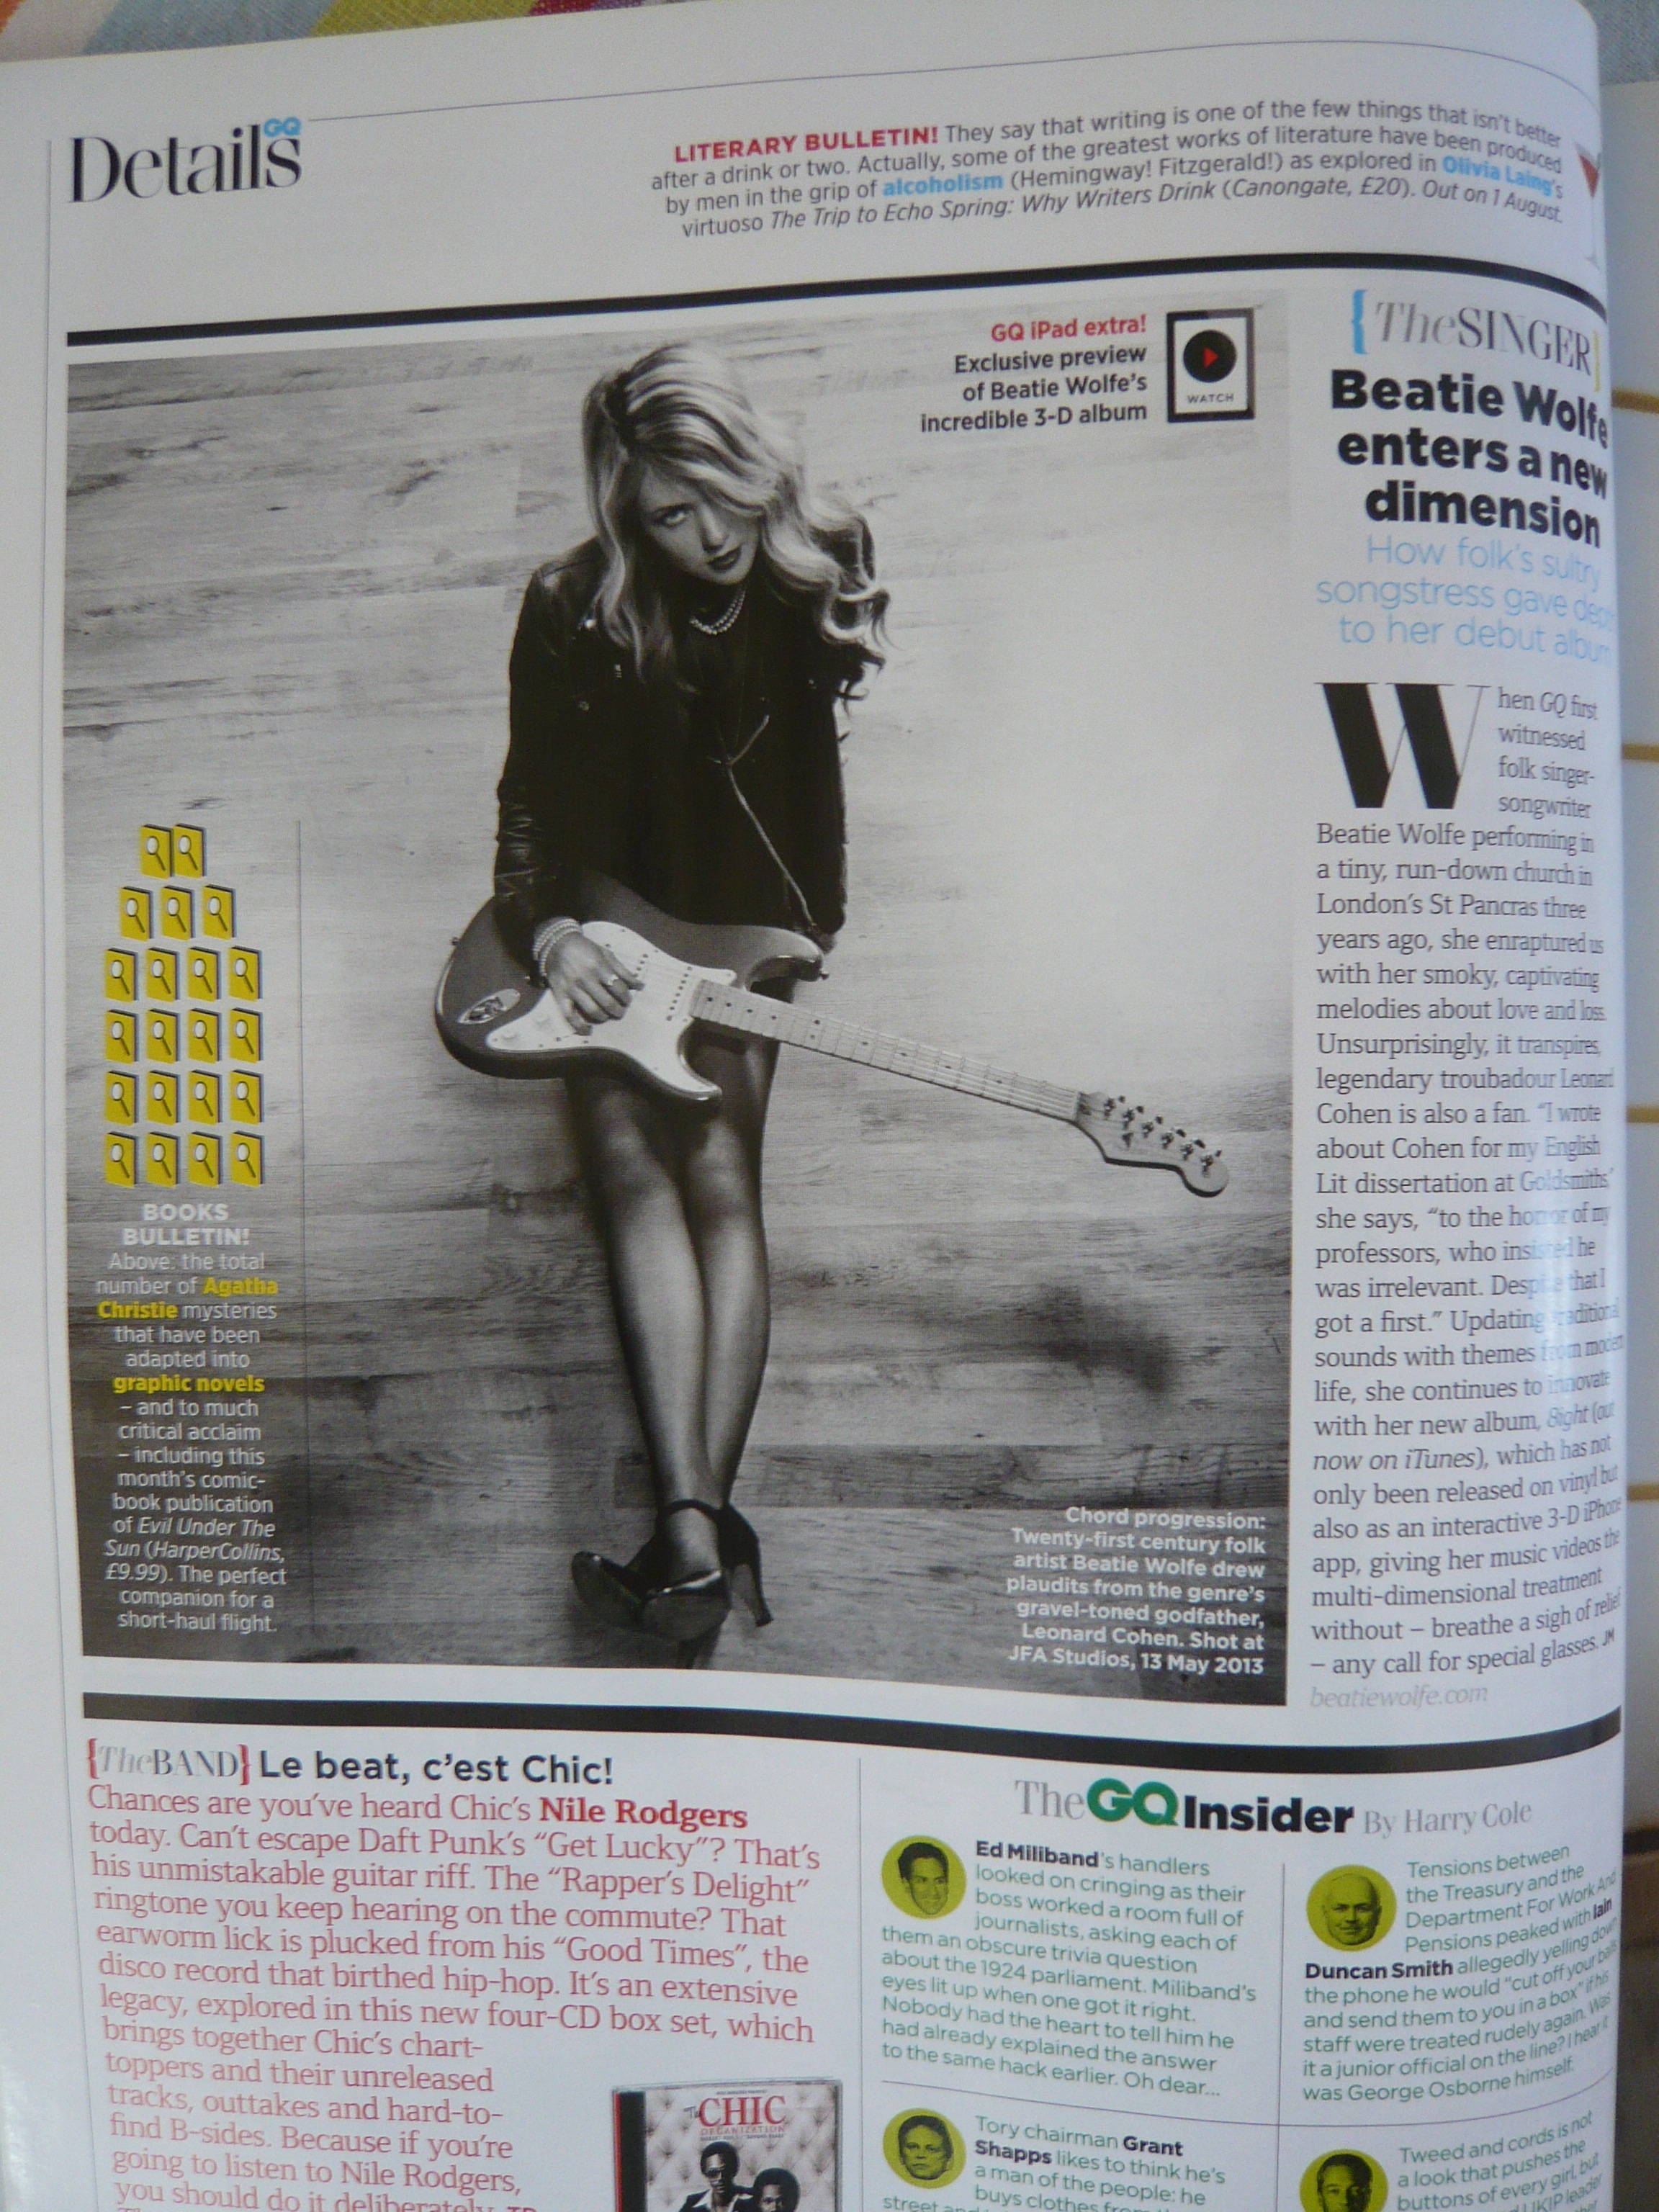 20130702 British GQ August Edition a Music Special Beatie Wolfe image and article.jpg